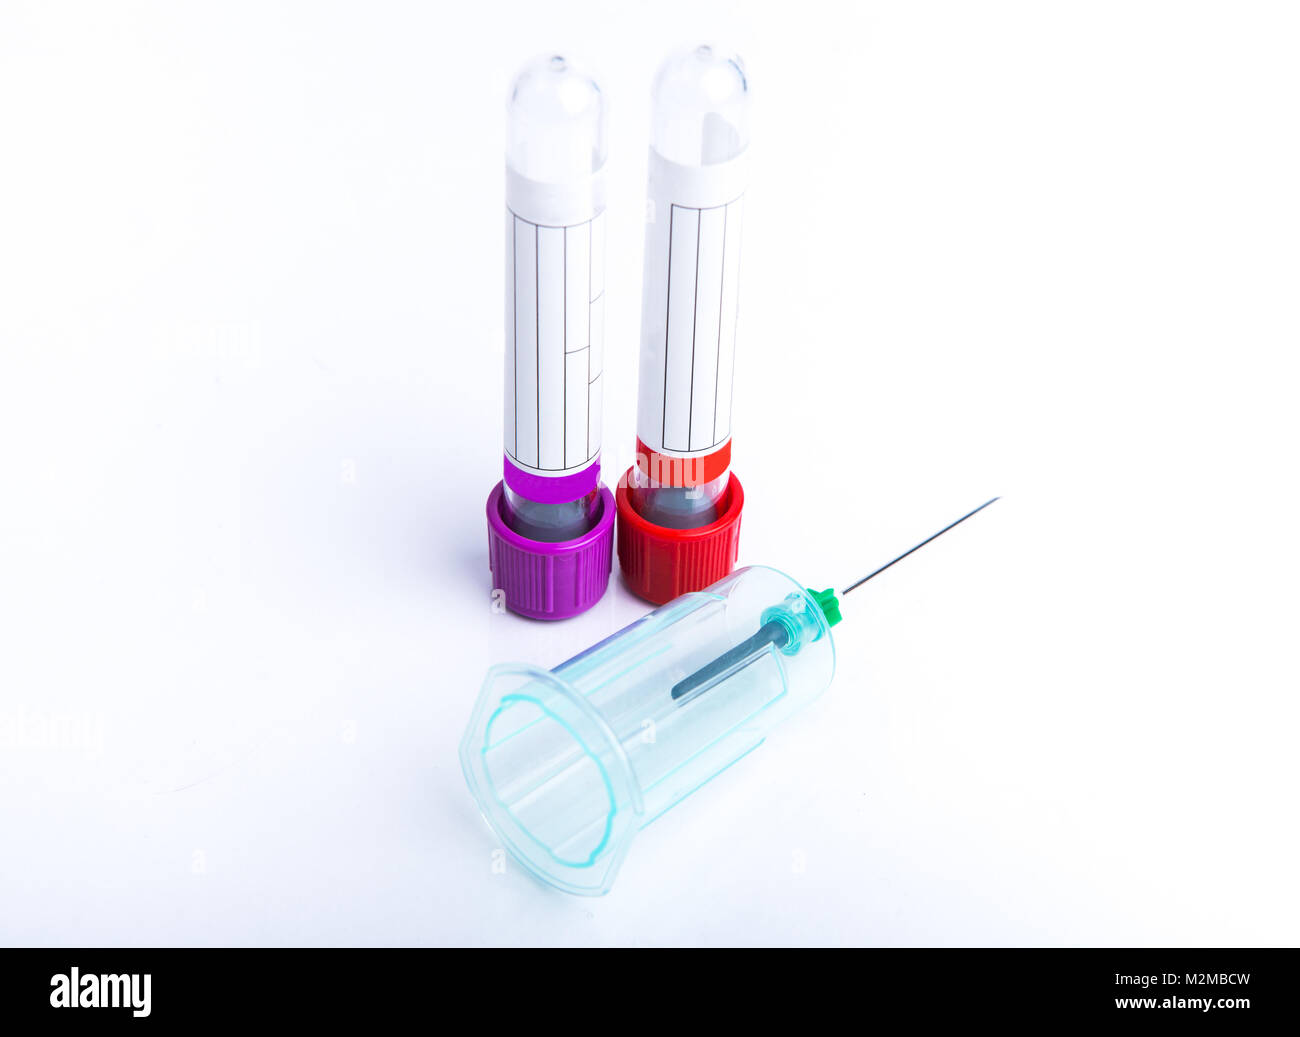 Vacutainer Blood Collection Pre Attached Holder With Two Tube Blood Collection Edta Tube Isolated On White Background Stock Photo Alamy